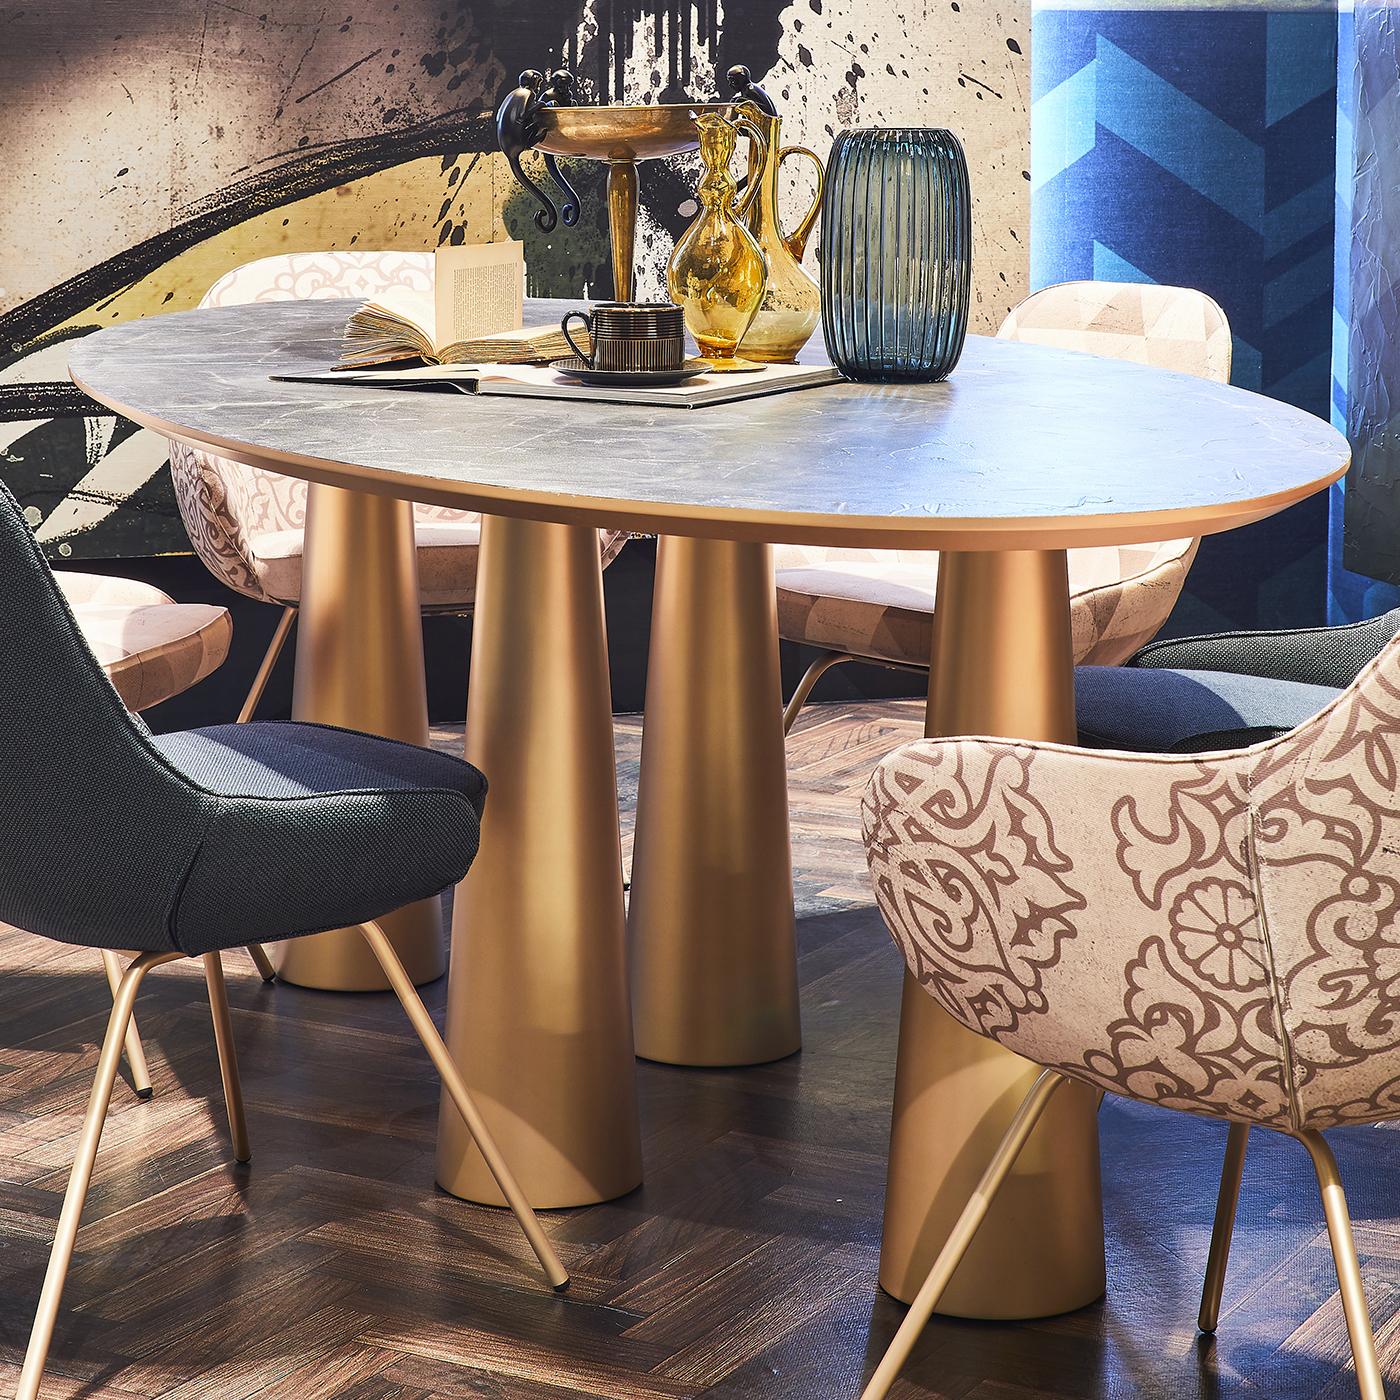 The unique design of this table lends it an unconventional and eclectic allure that will stand out in a modern interior. The oval MDF top is covered by a material surface that is hand applied and finished with a matte, non-toxic resin and features